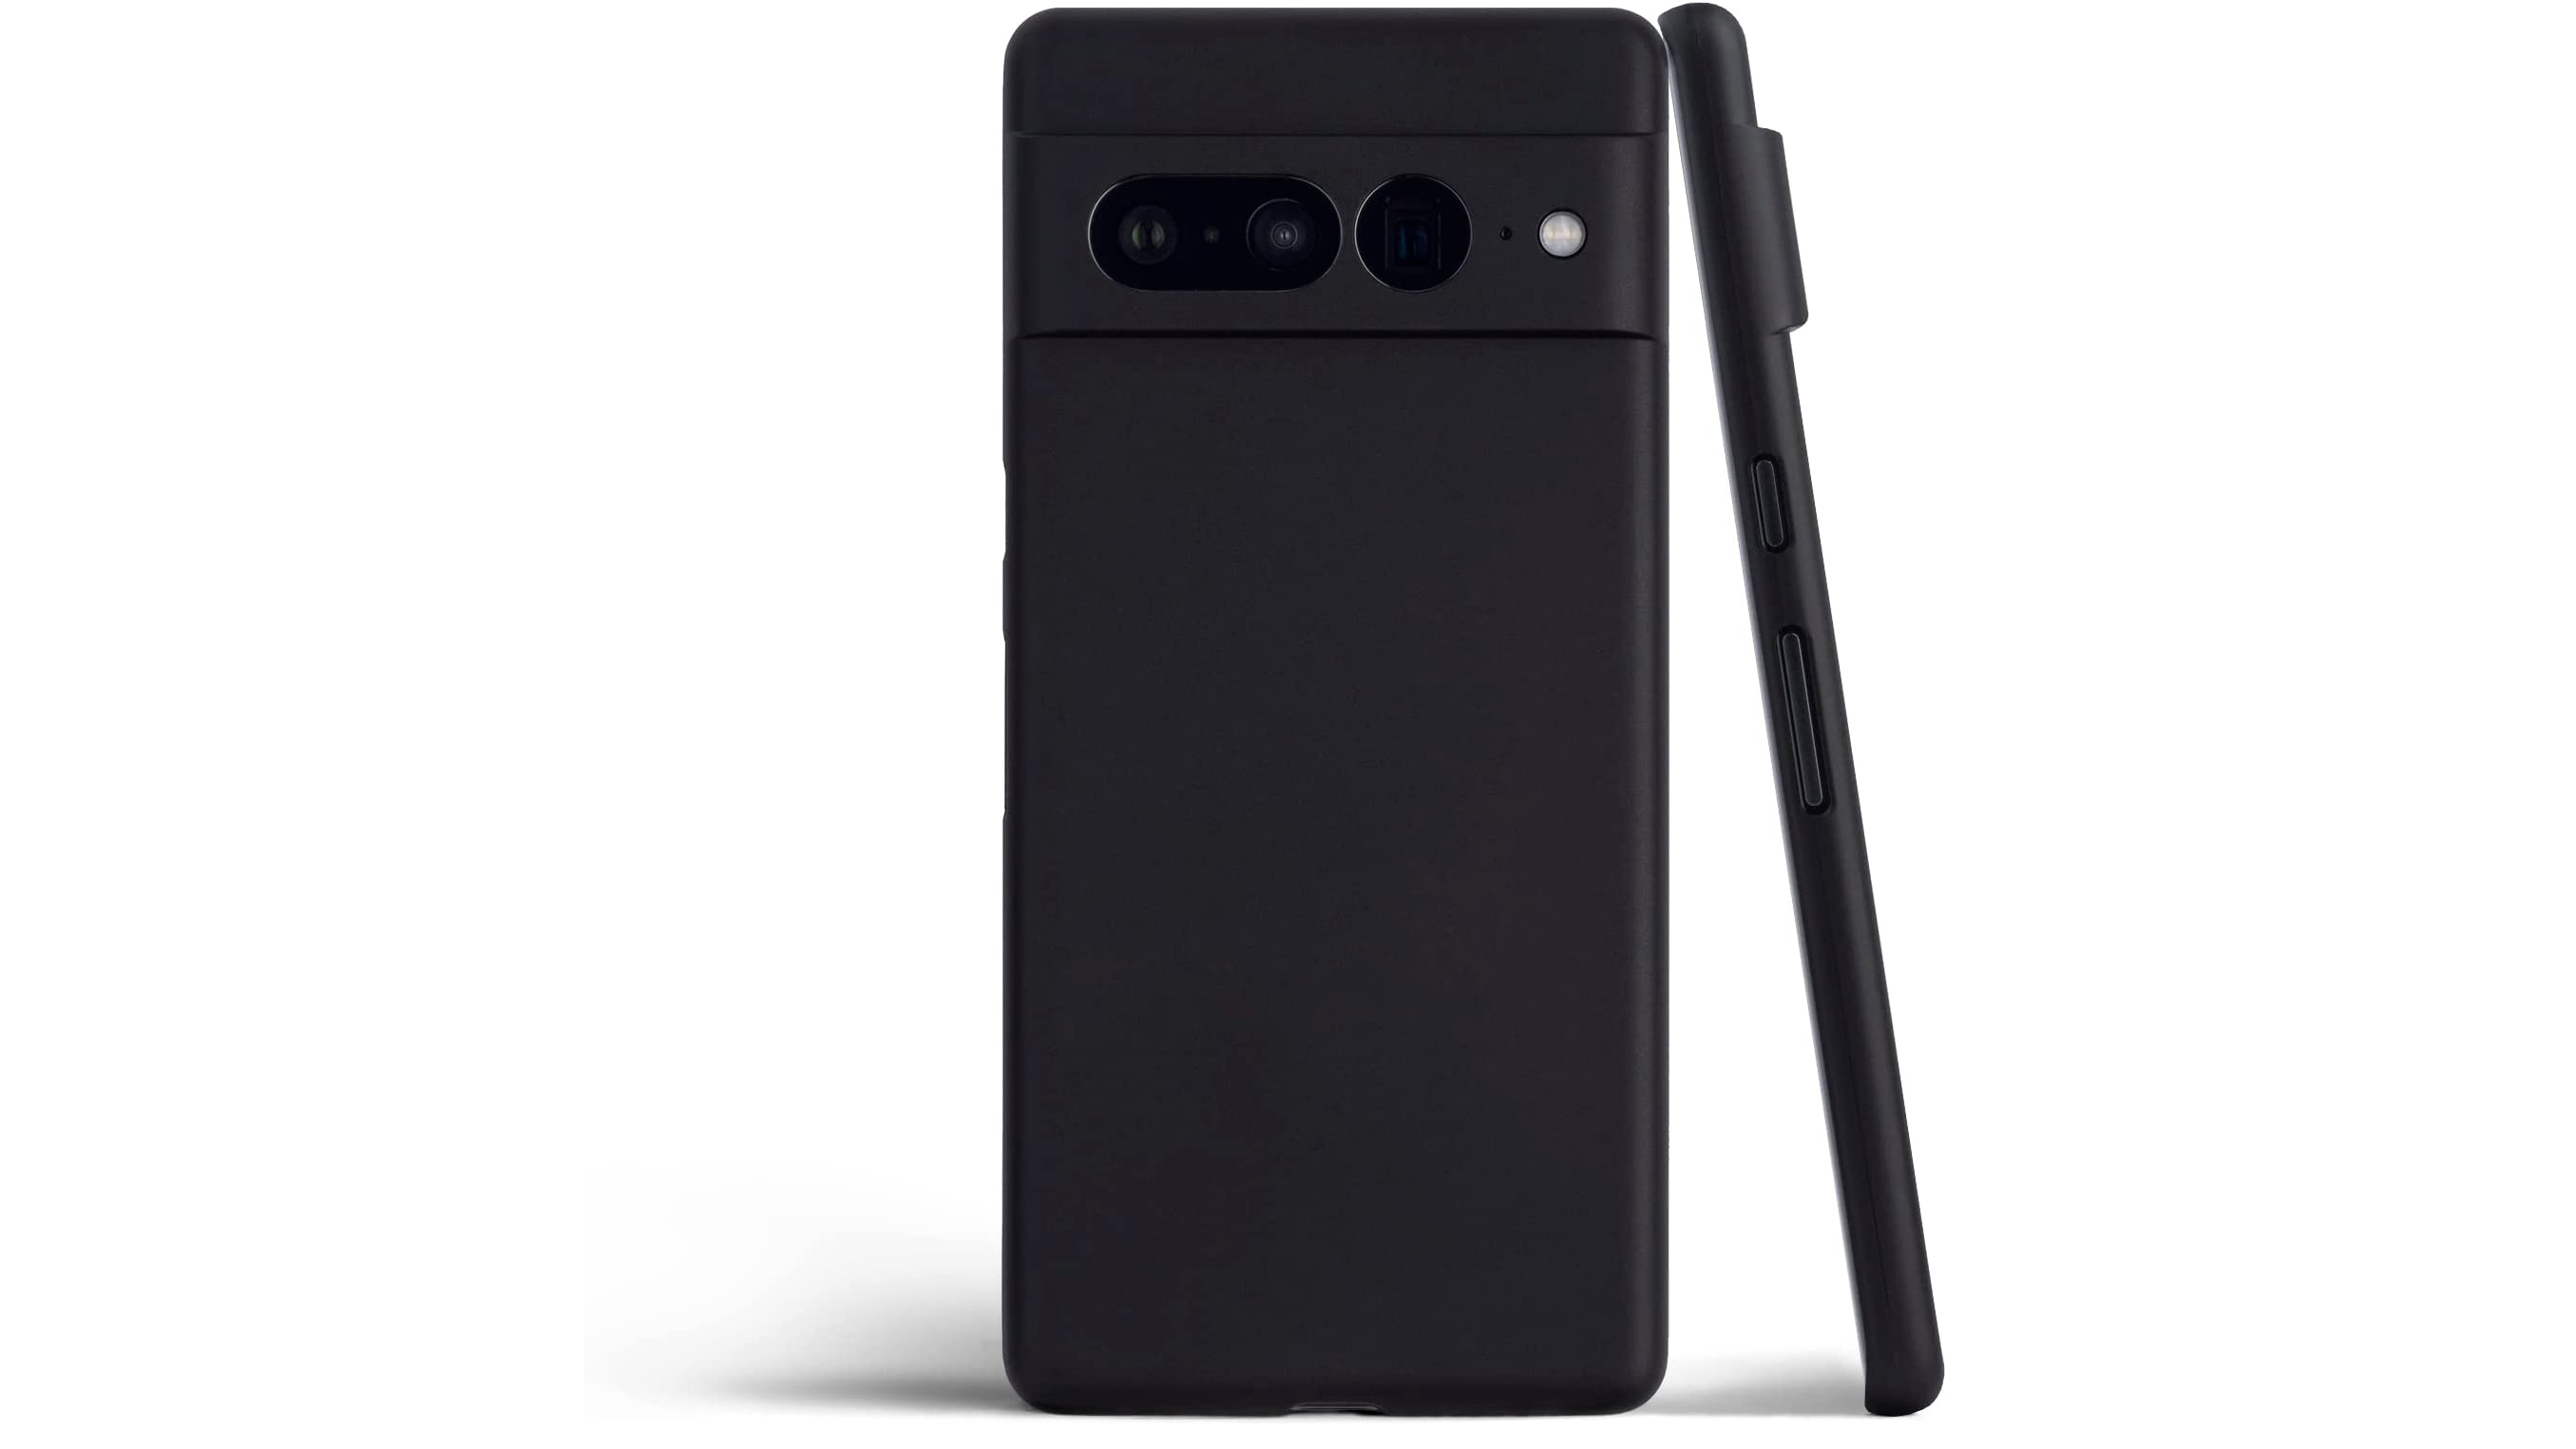 Best Google Pixel 7 Pro Case: Ultra-thin mini case from Totallee